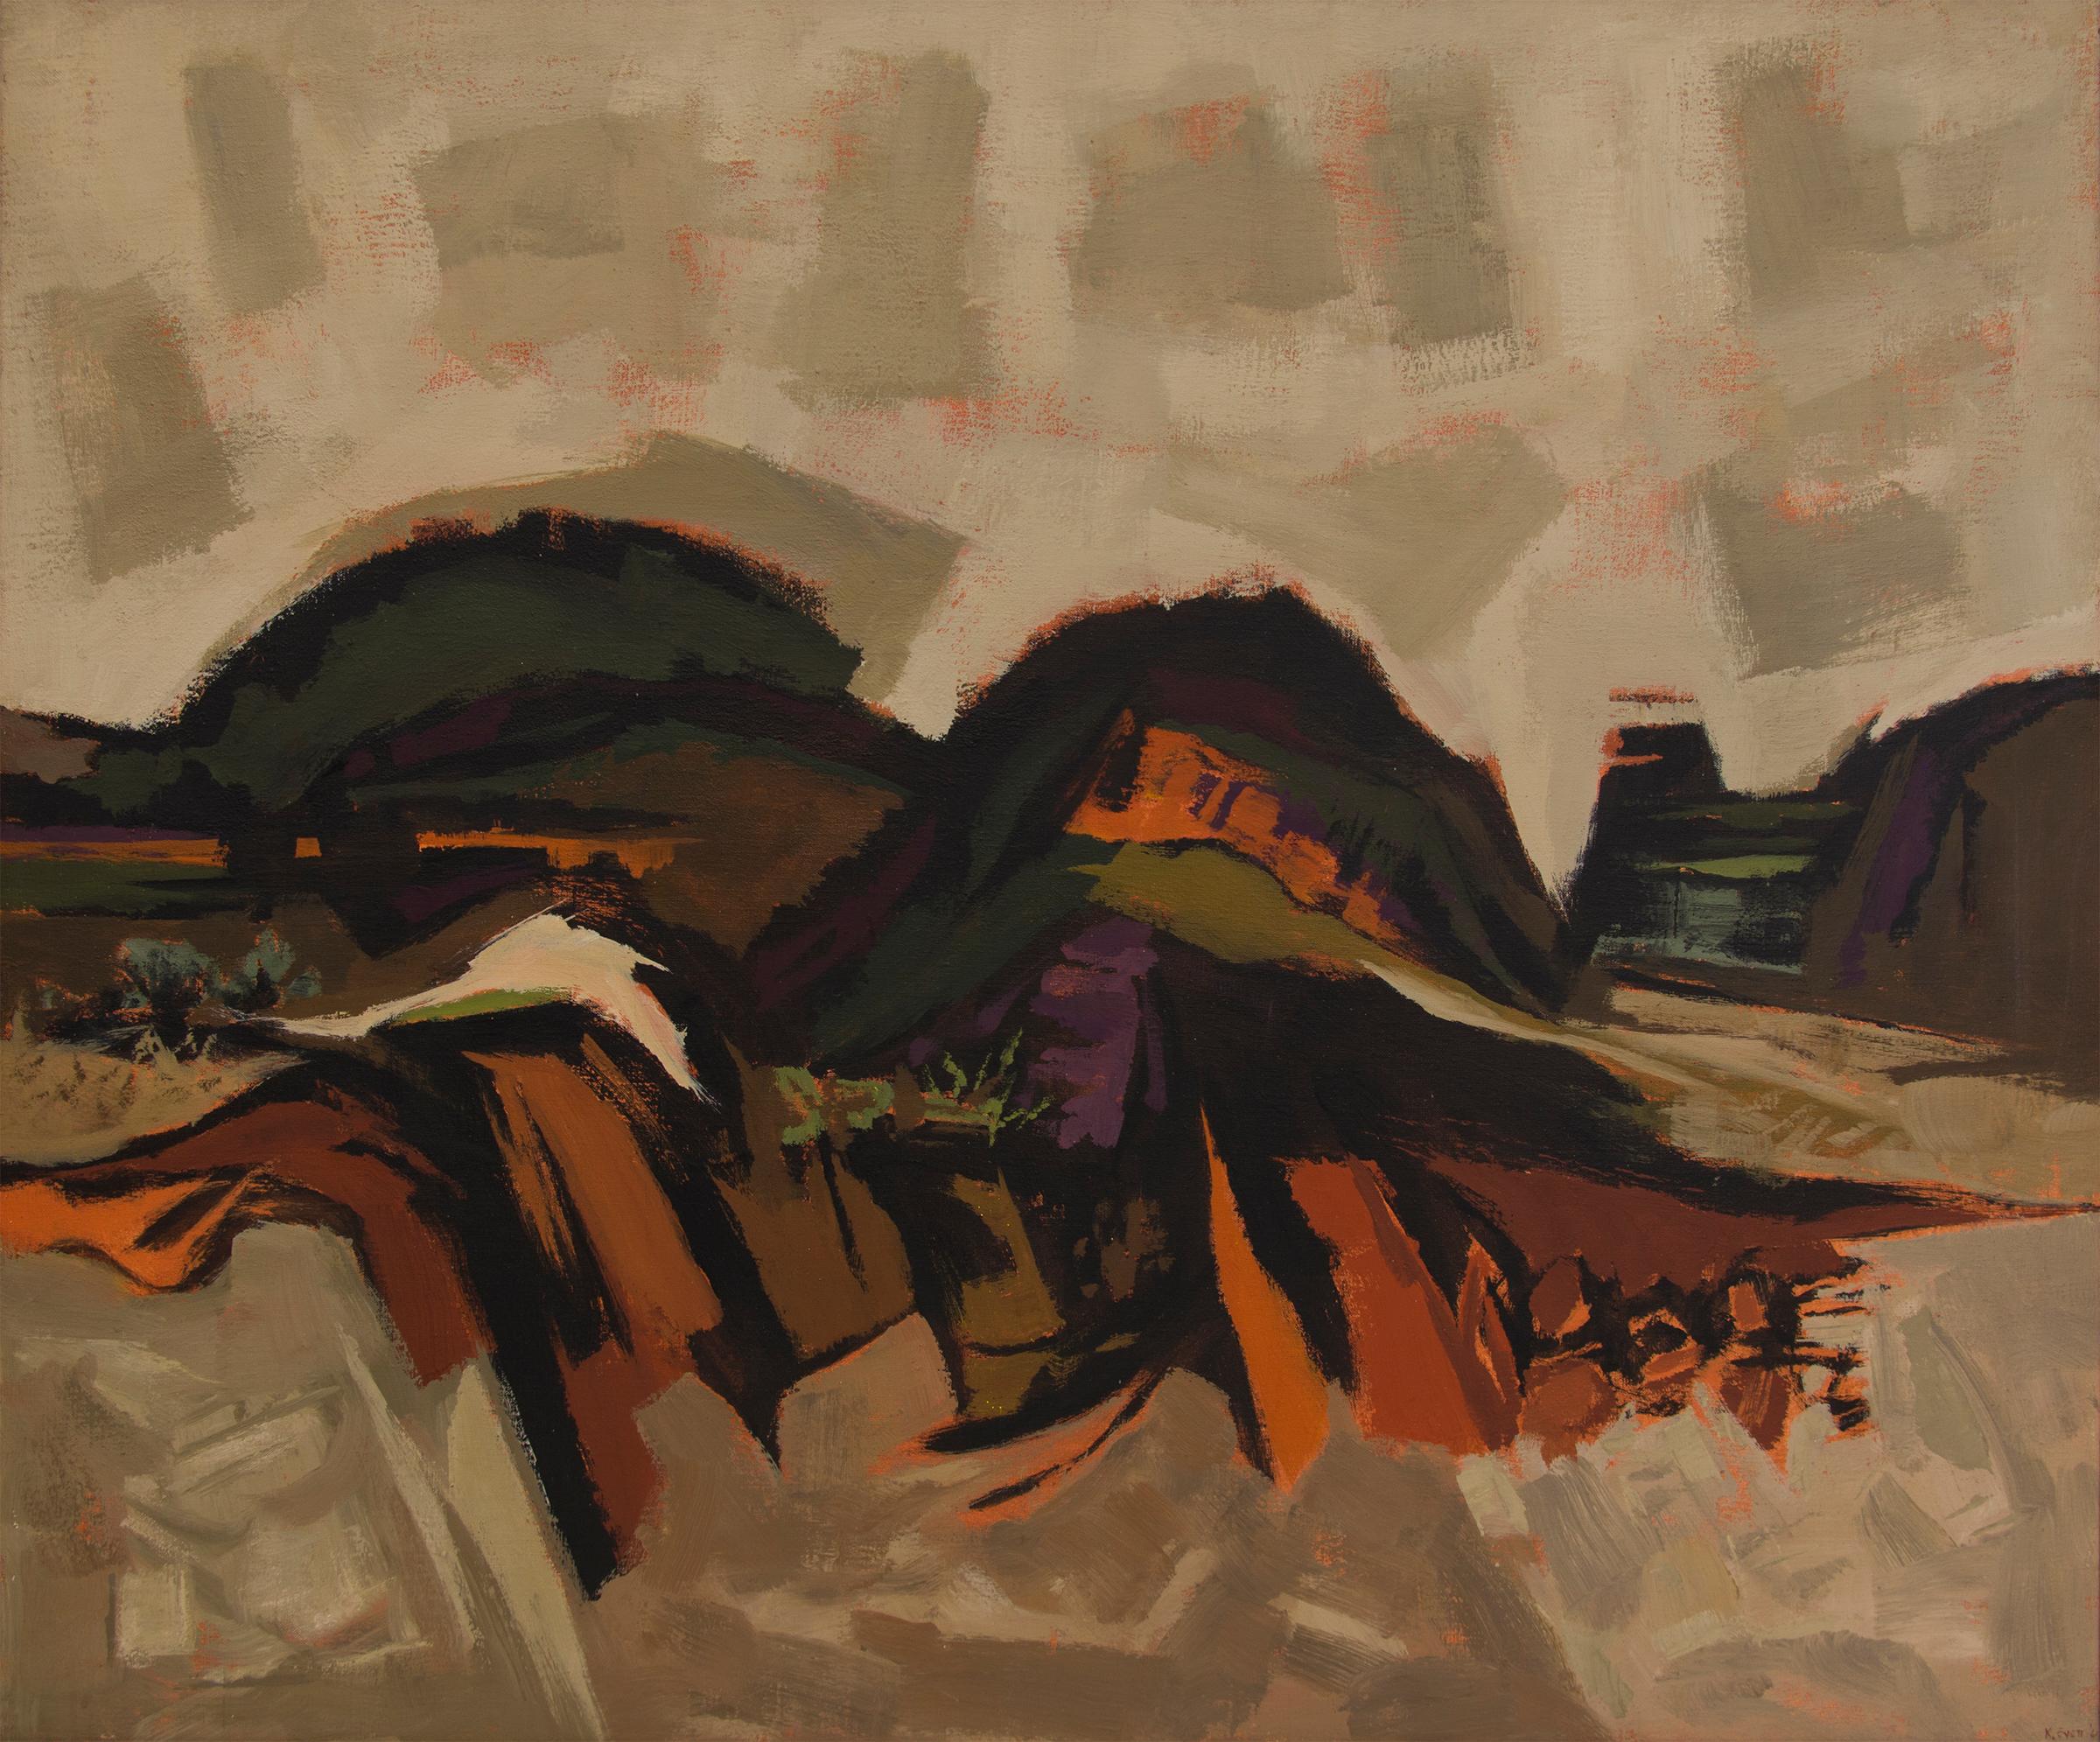 Western Landscape (Abstract Modernist Mountains) - Painting by Kenneth Evett